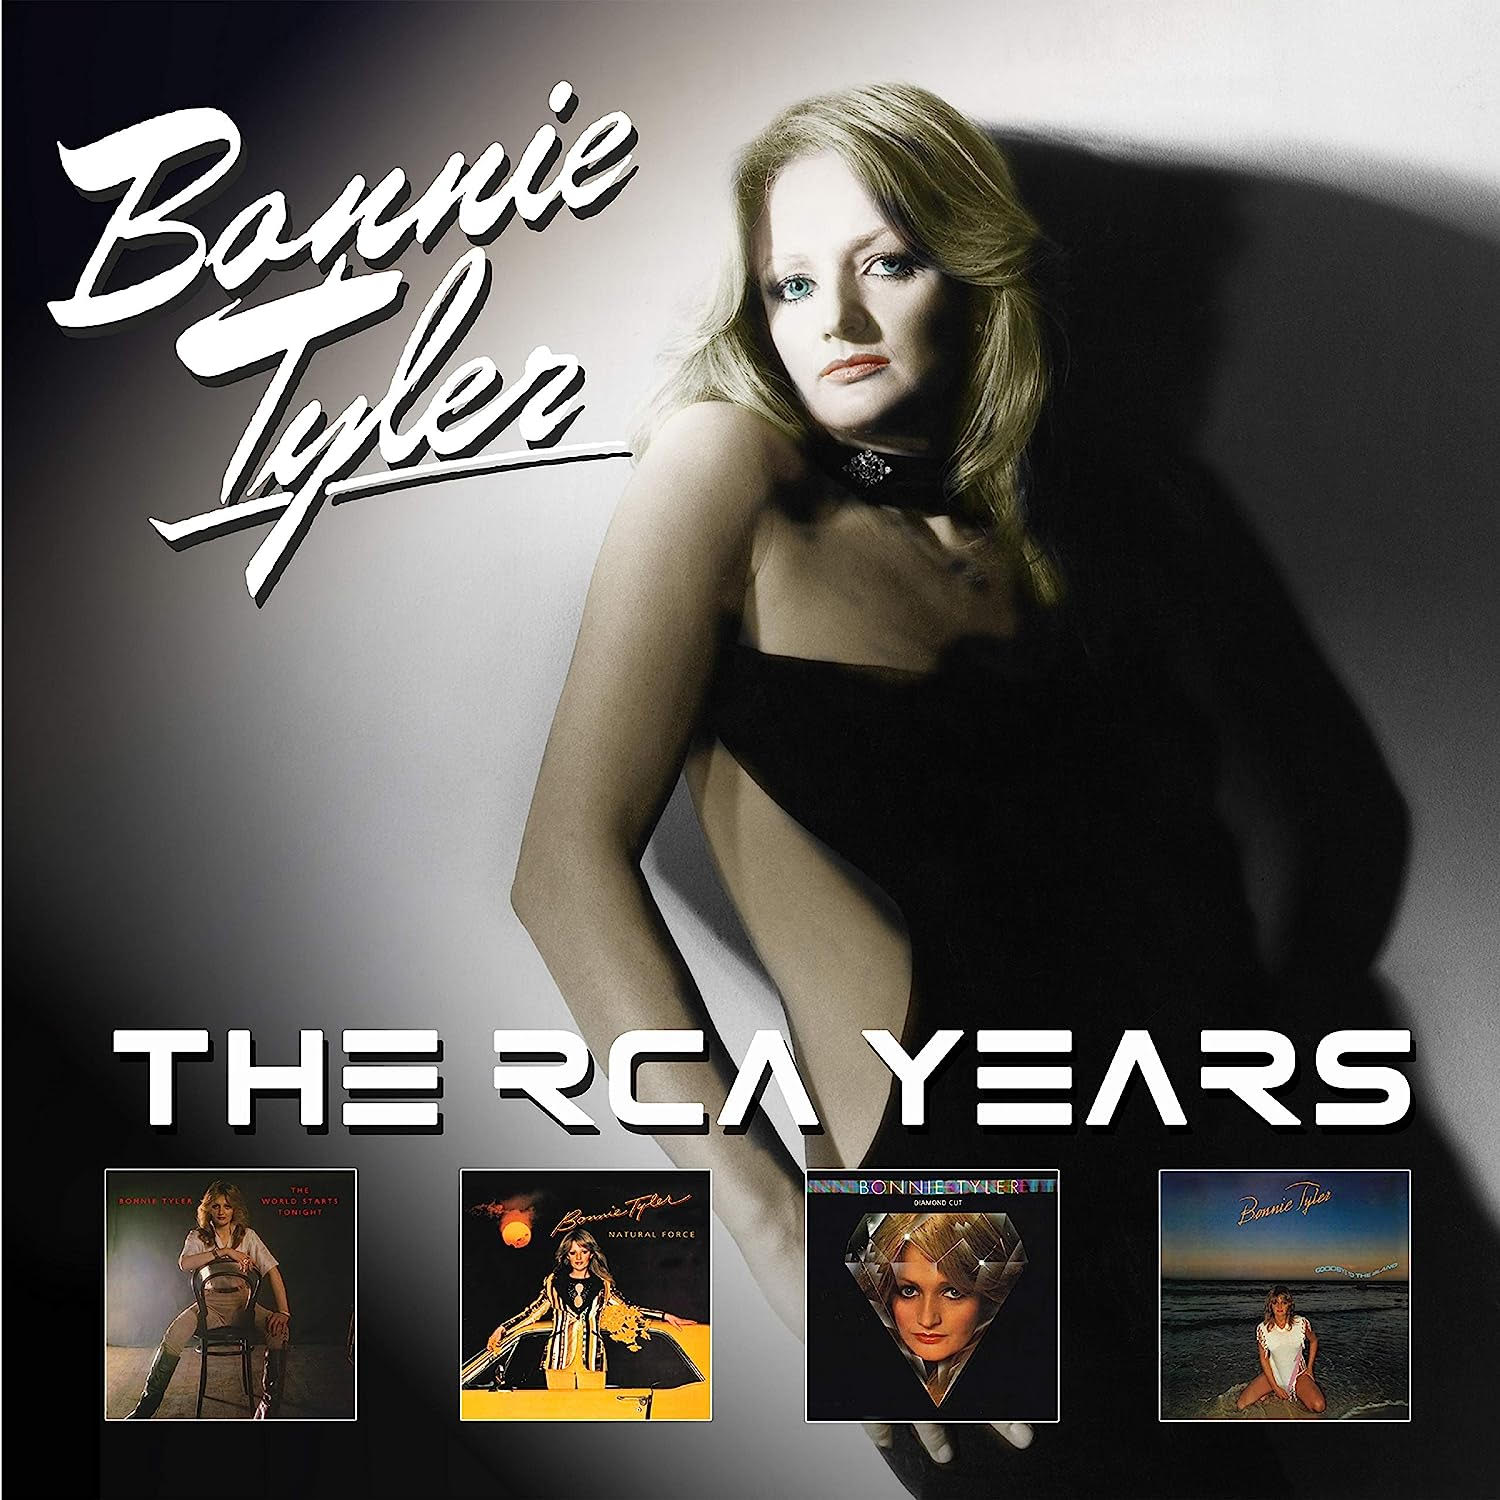 Bonnie Tyler - The RCA Years (4 CD Box Set - Imported)